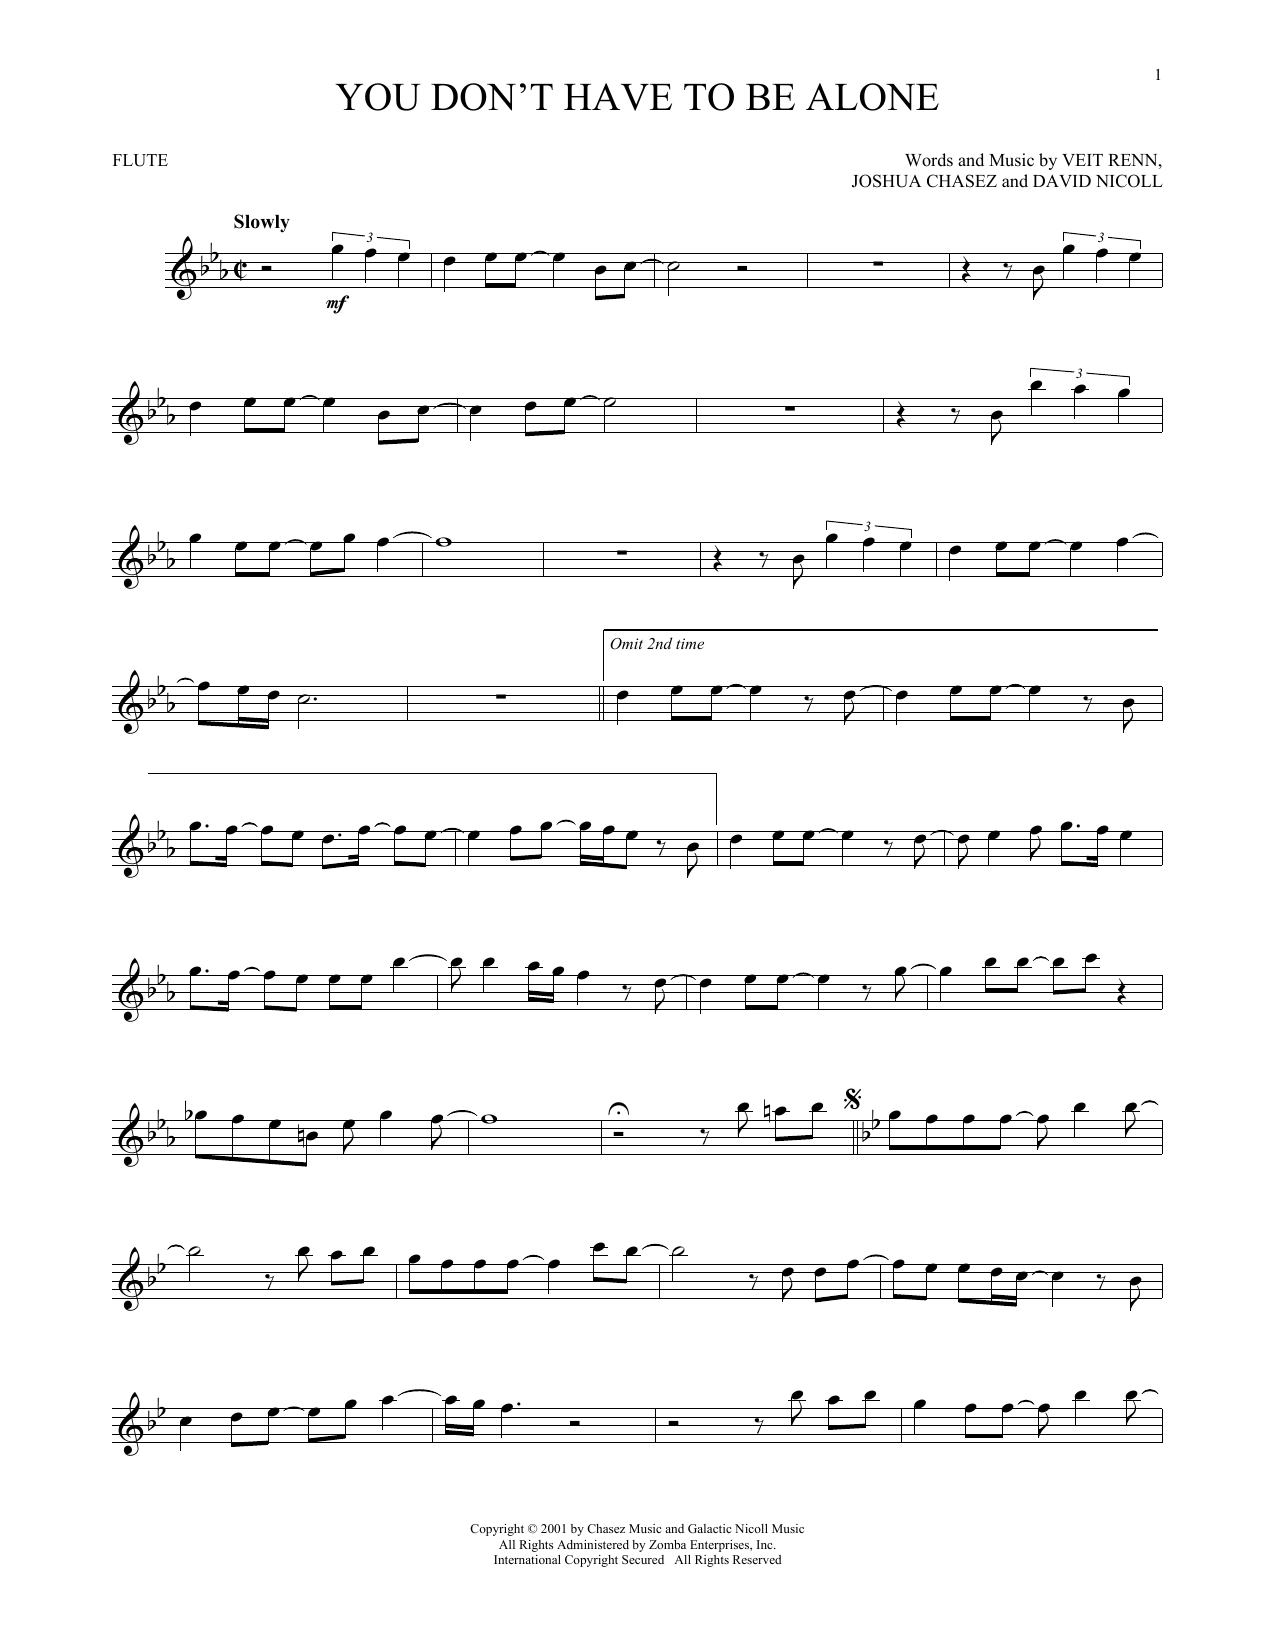 Download NSYNC You Don't Have To Be Alone Sheet Music